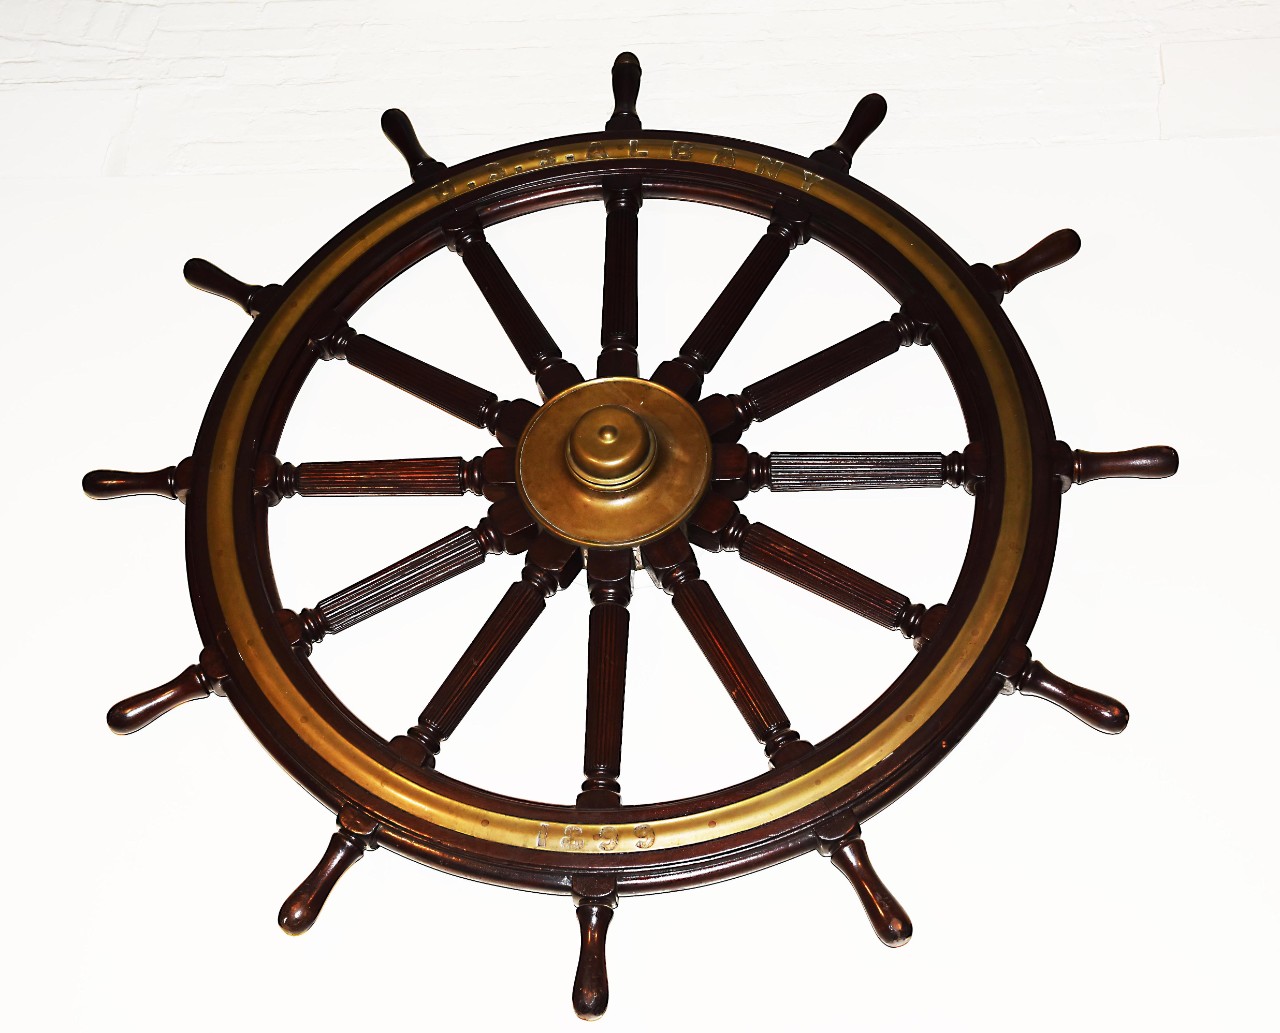 NMUSN-5143: Protected cruiser Albany’s Helm Wheel, December 2022. Wheel while on display in the Spanish American War display area. Official U.S. National Museum of the U.S. Navy Photograph. Digital only.